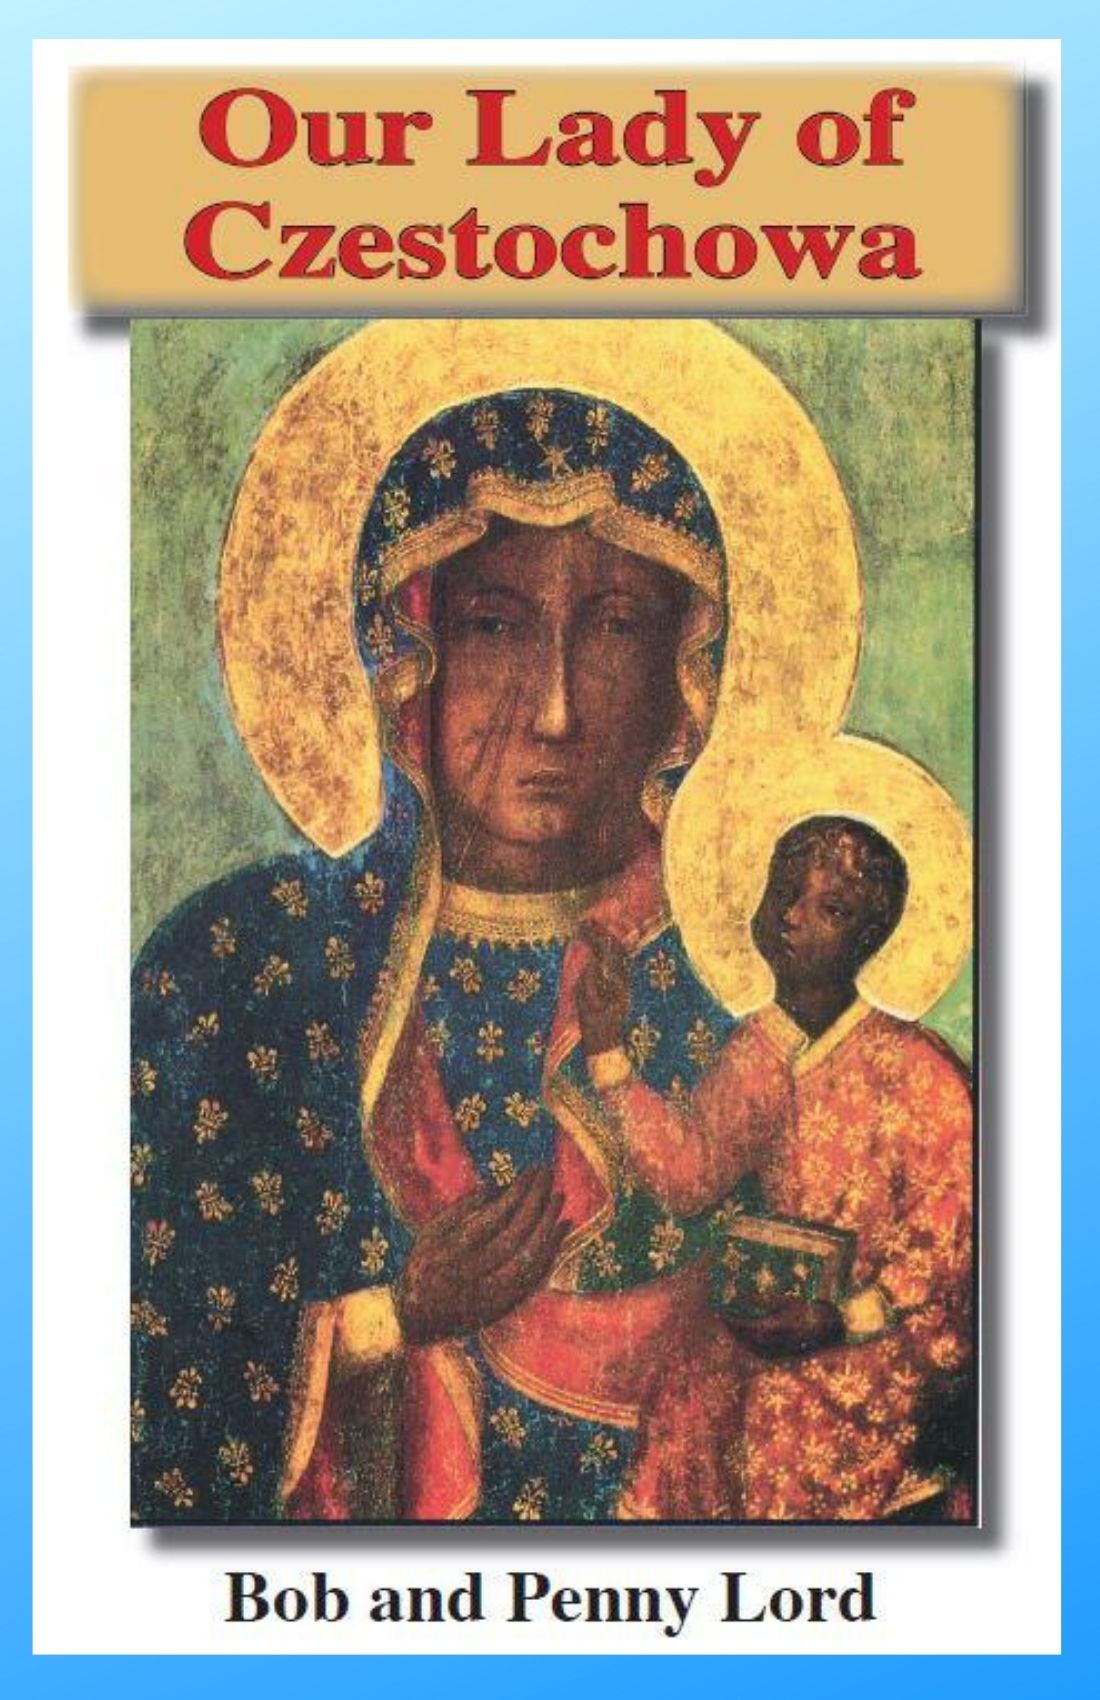 Our Lady of Czestochowa Minibook - Bob and Penny Lord